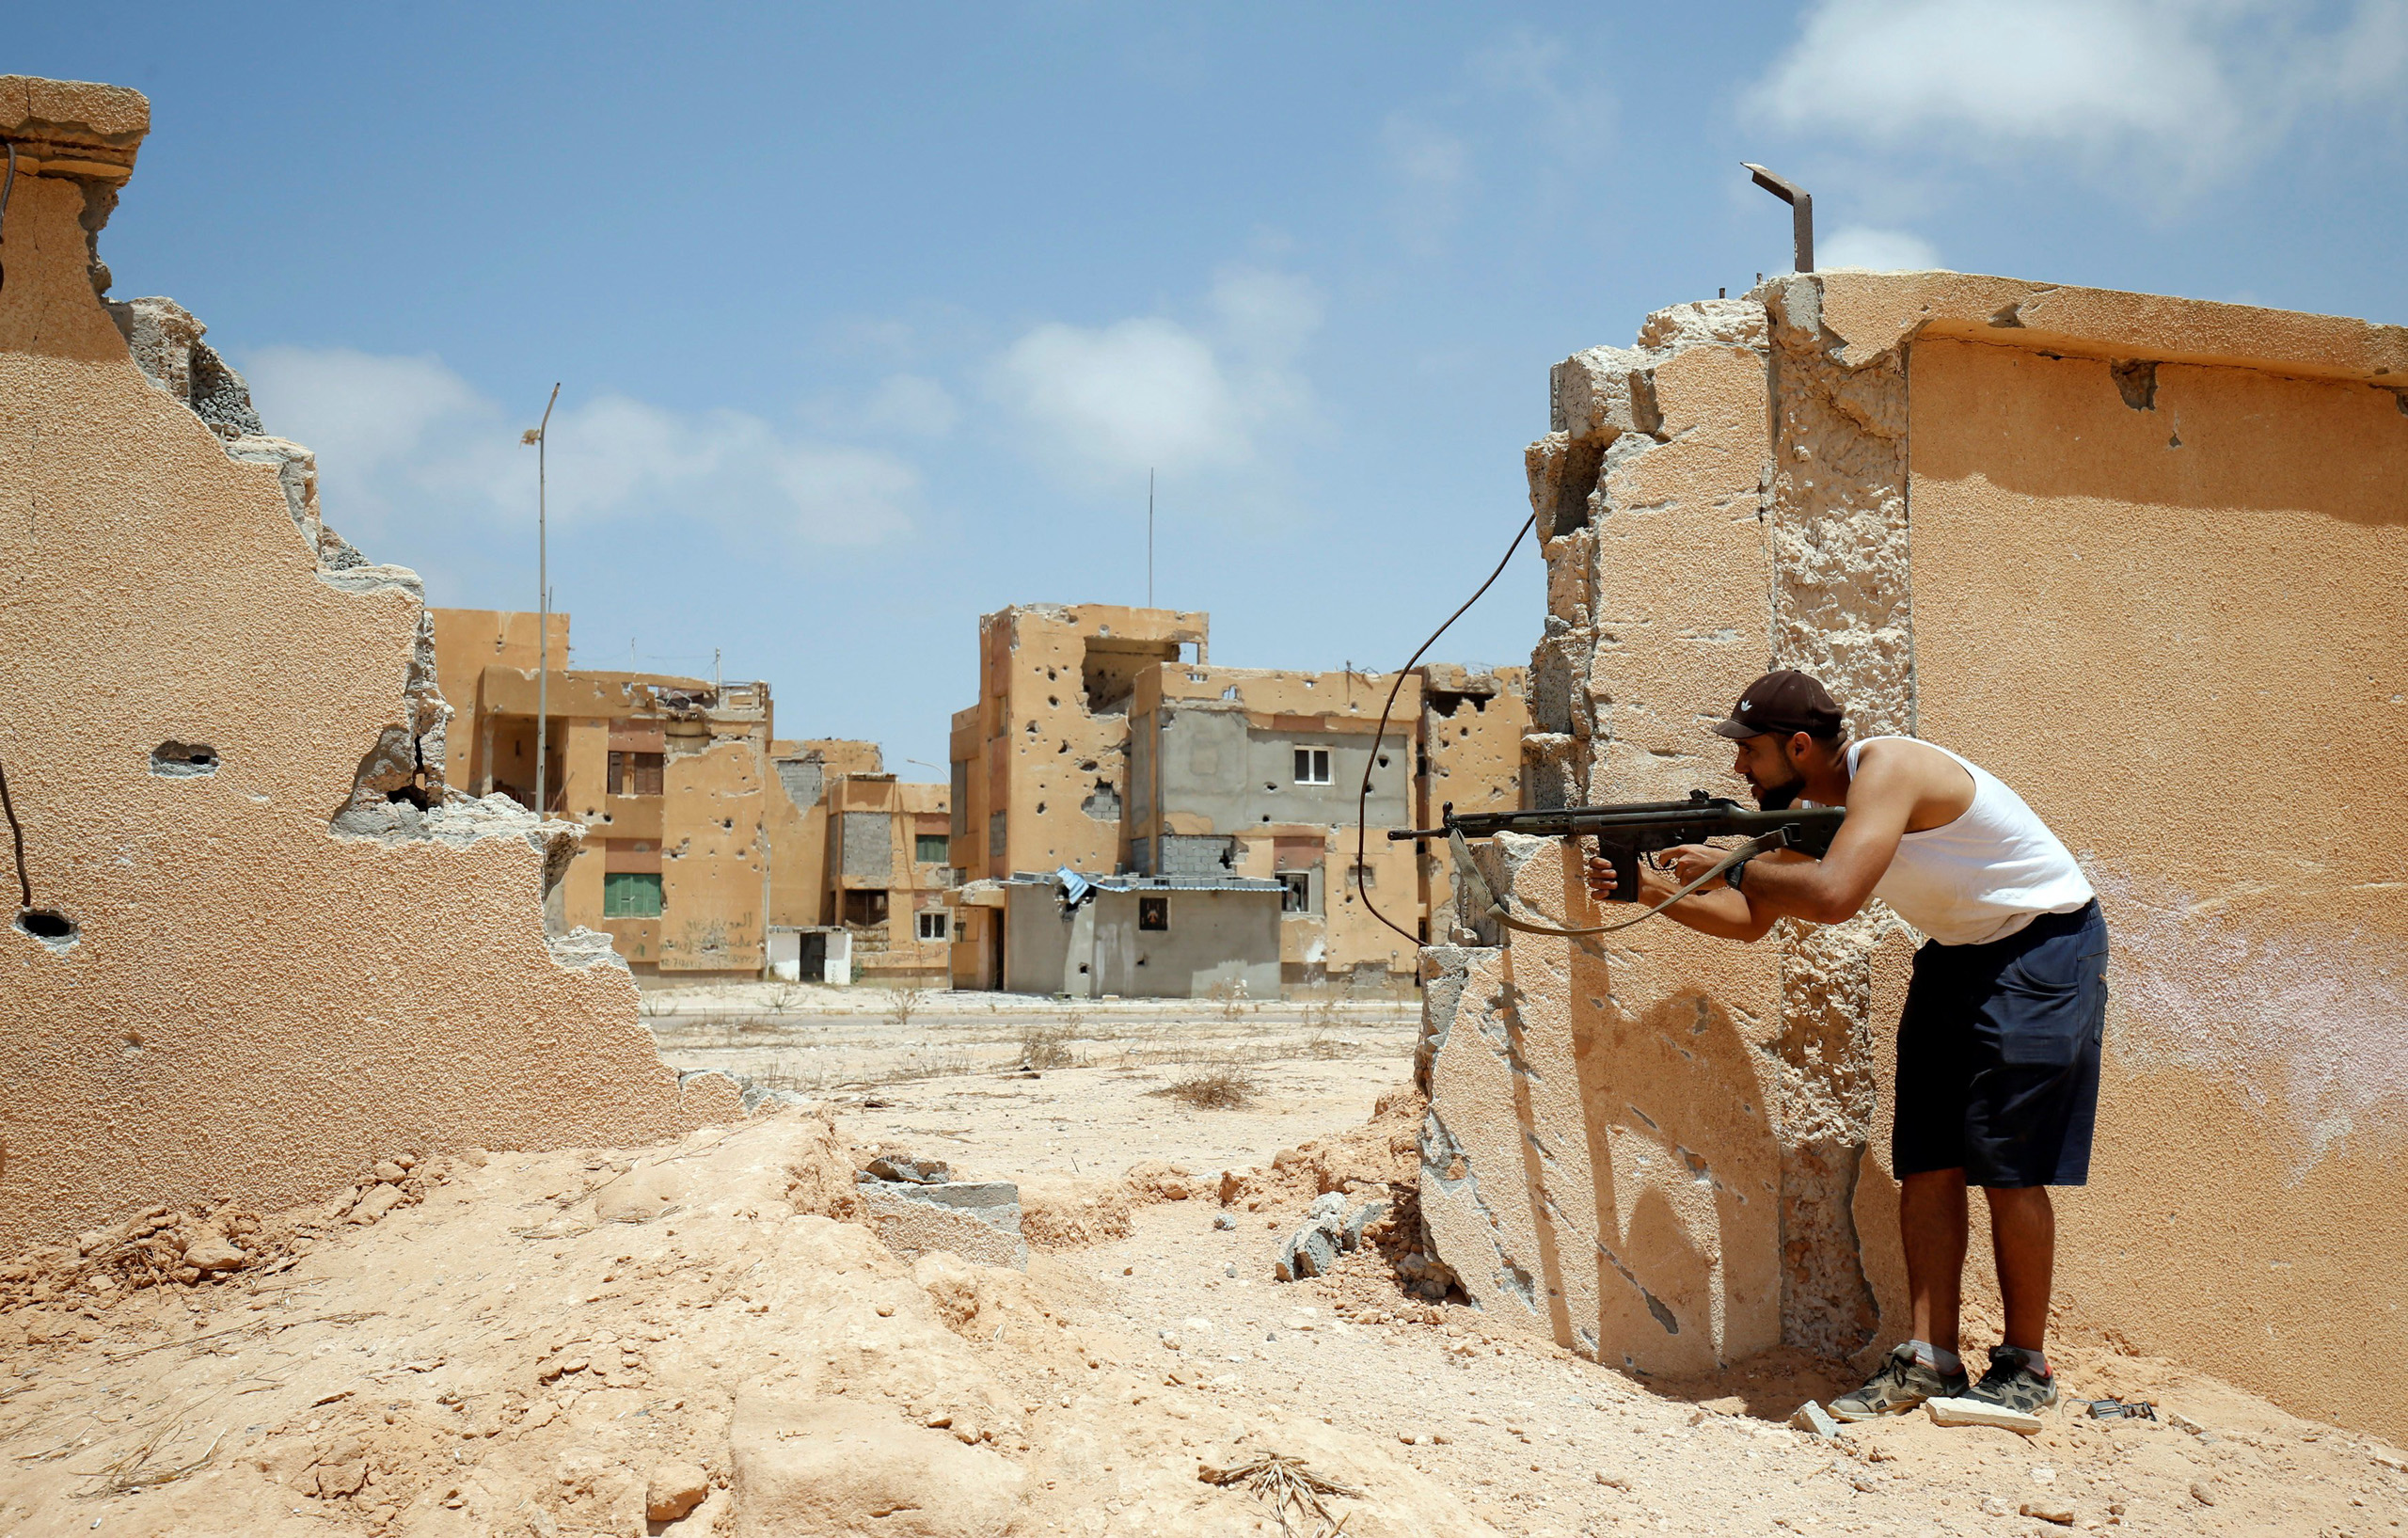 A Libyan fighters fires his gun at an ISIS position during a battle in Sirt, Libya, on July 15, 2016.